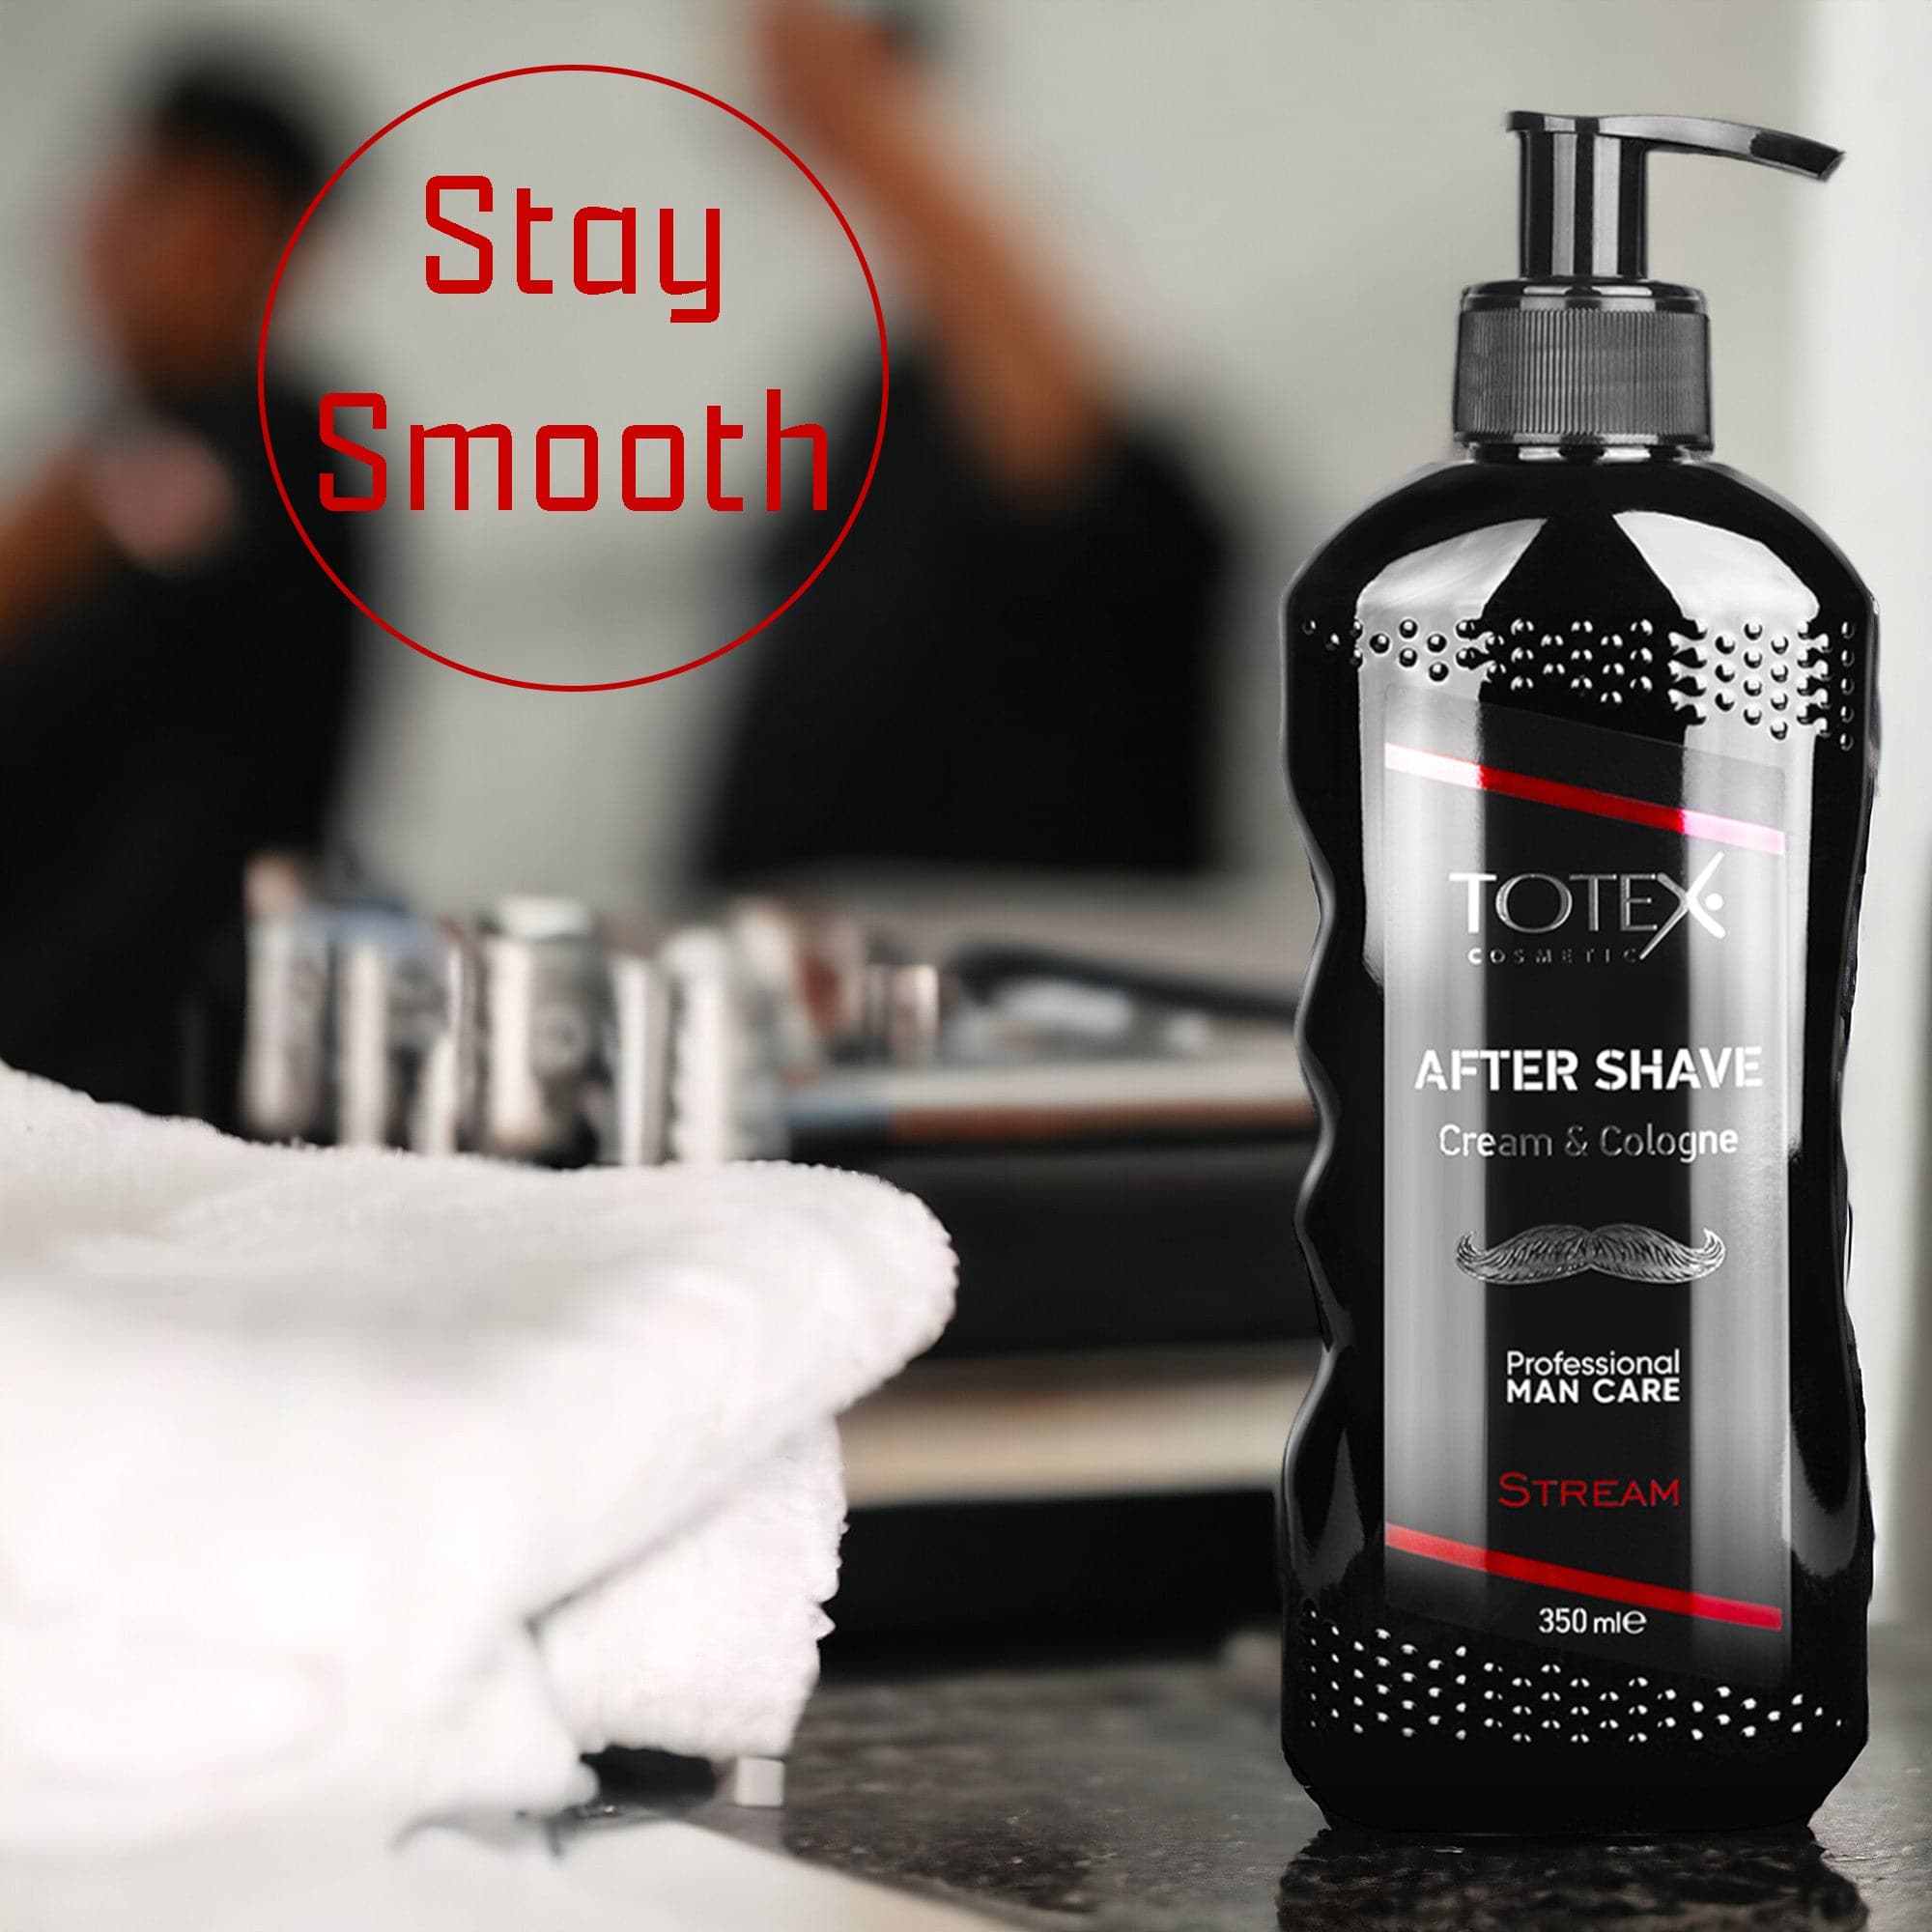 Totex - After Shave Cream & Cologne Stream 350ml